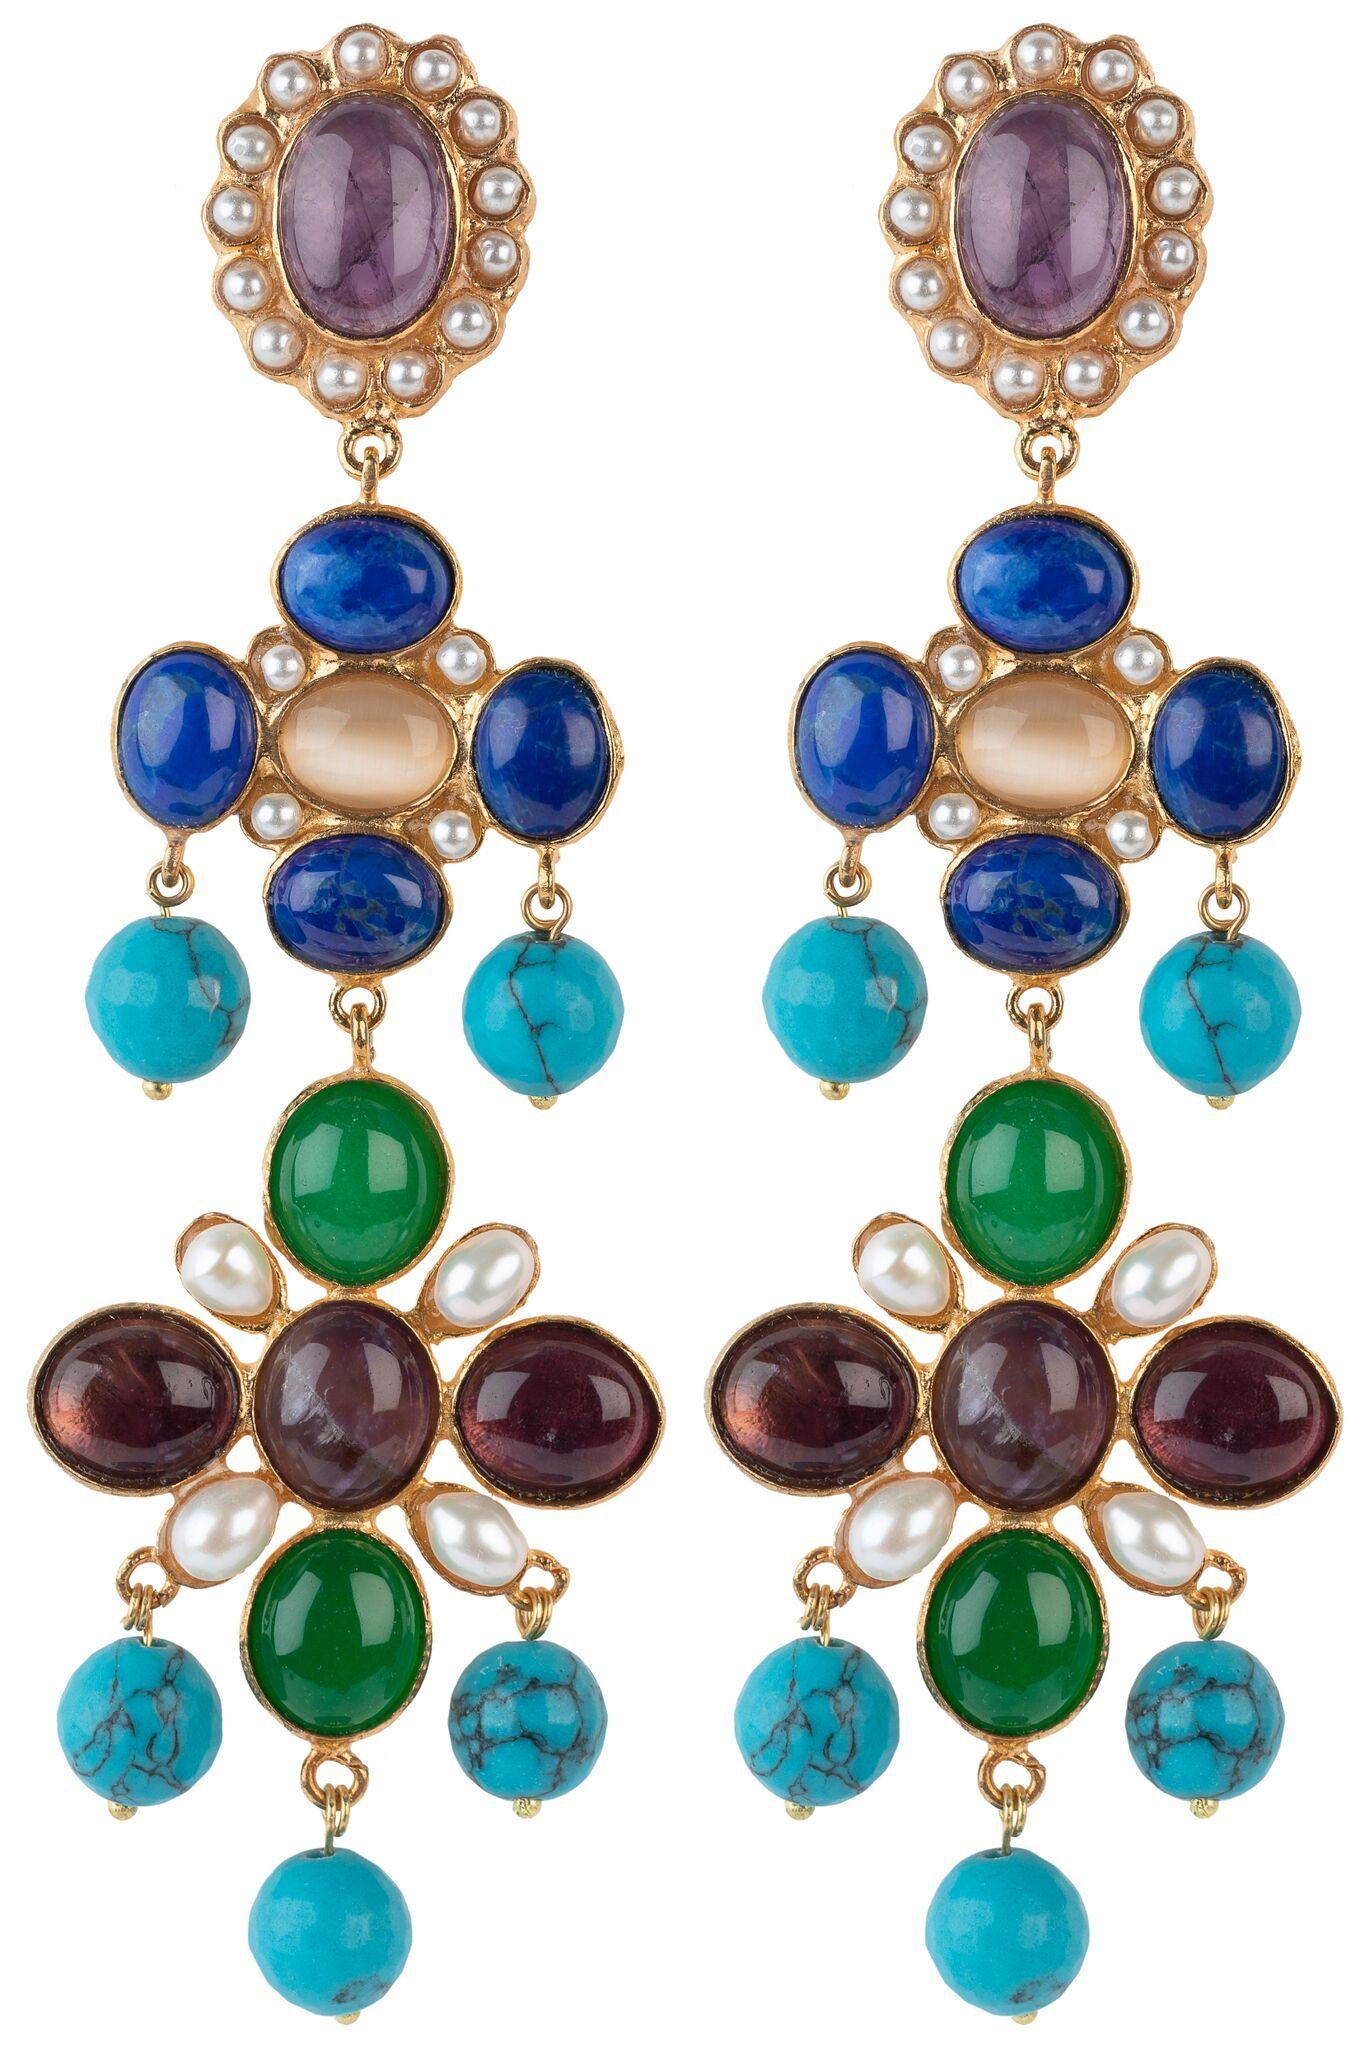 The Julietta Earrings are handcrafted in Europe. Created with 24k gold-plated brass, the Julietta Earrings in Blue & Pink Pink feature Amethyst, Lapis Lazuli, Moonstone, Agate and acrylic pearls. Perfect for special occasions, bridal, cocktail